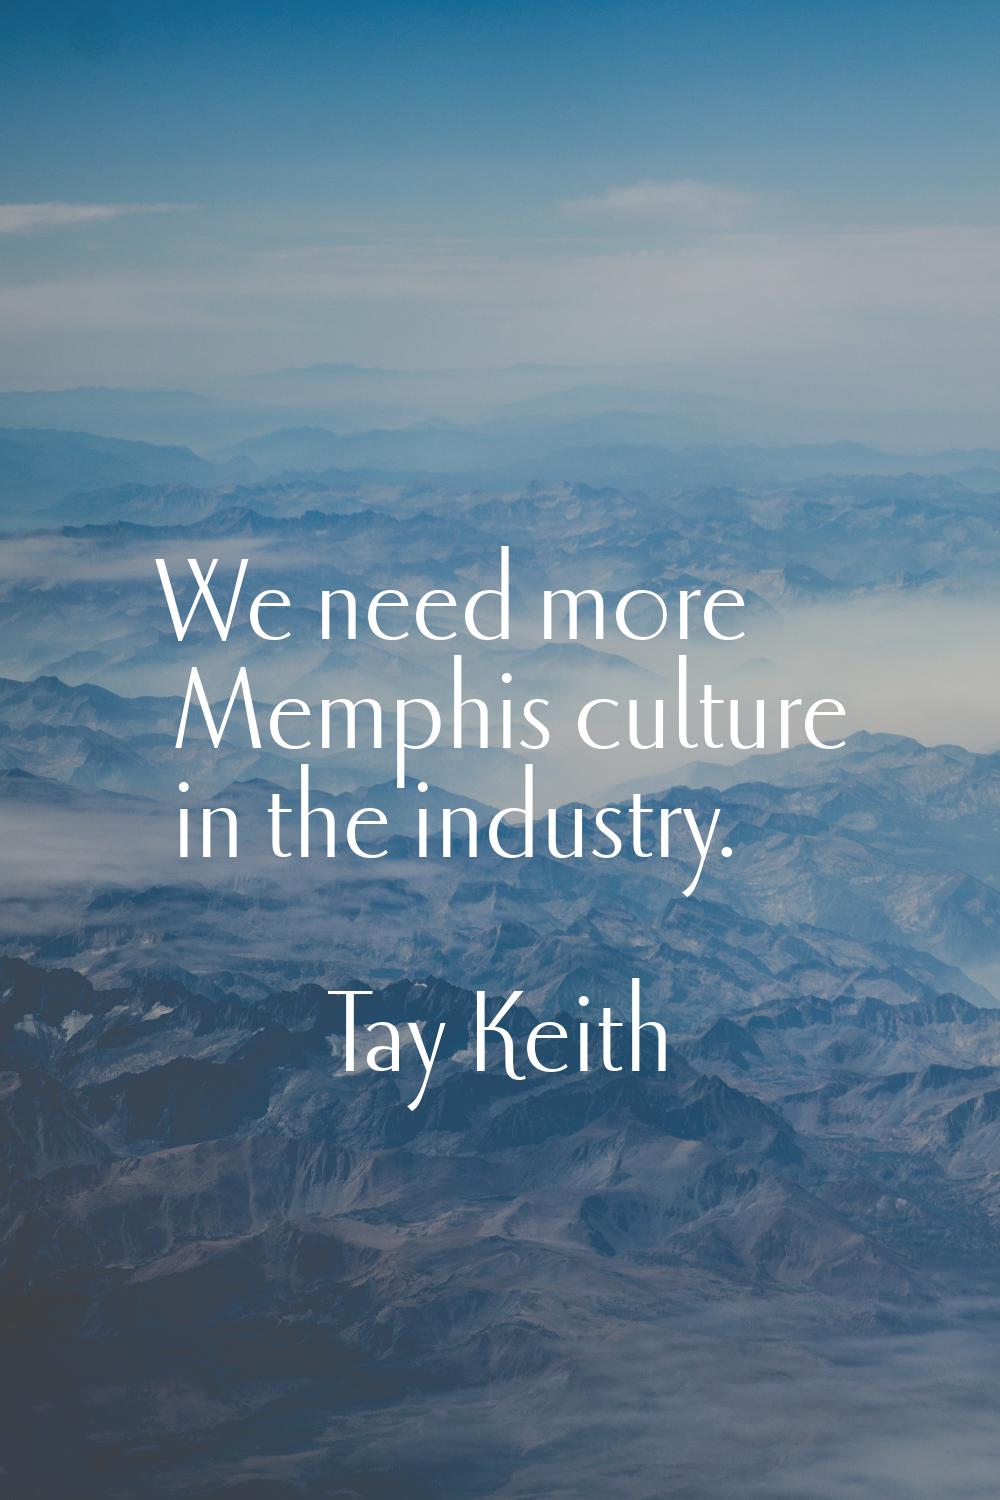 We need more Memphis culture in the industry.